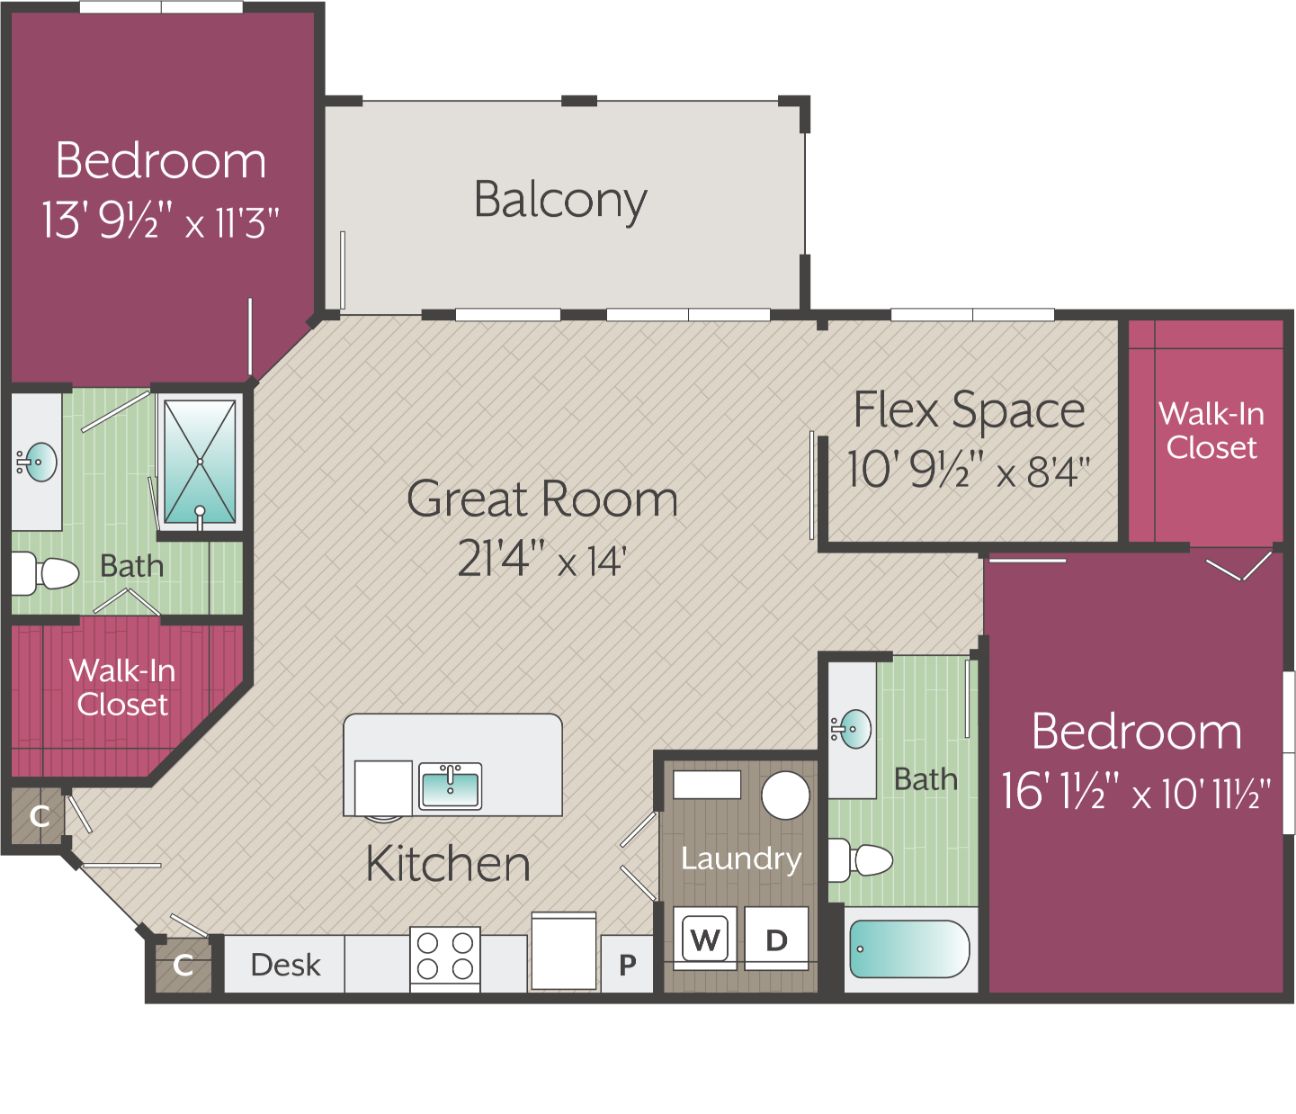 A floor plan for two-bedroom Apartments.